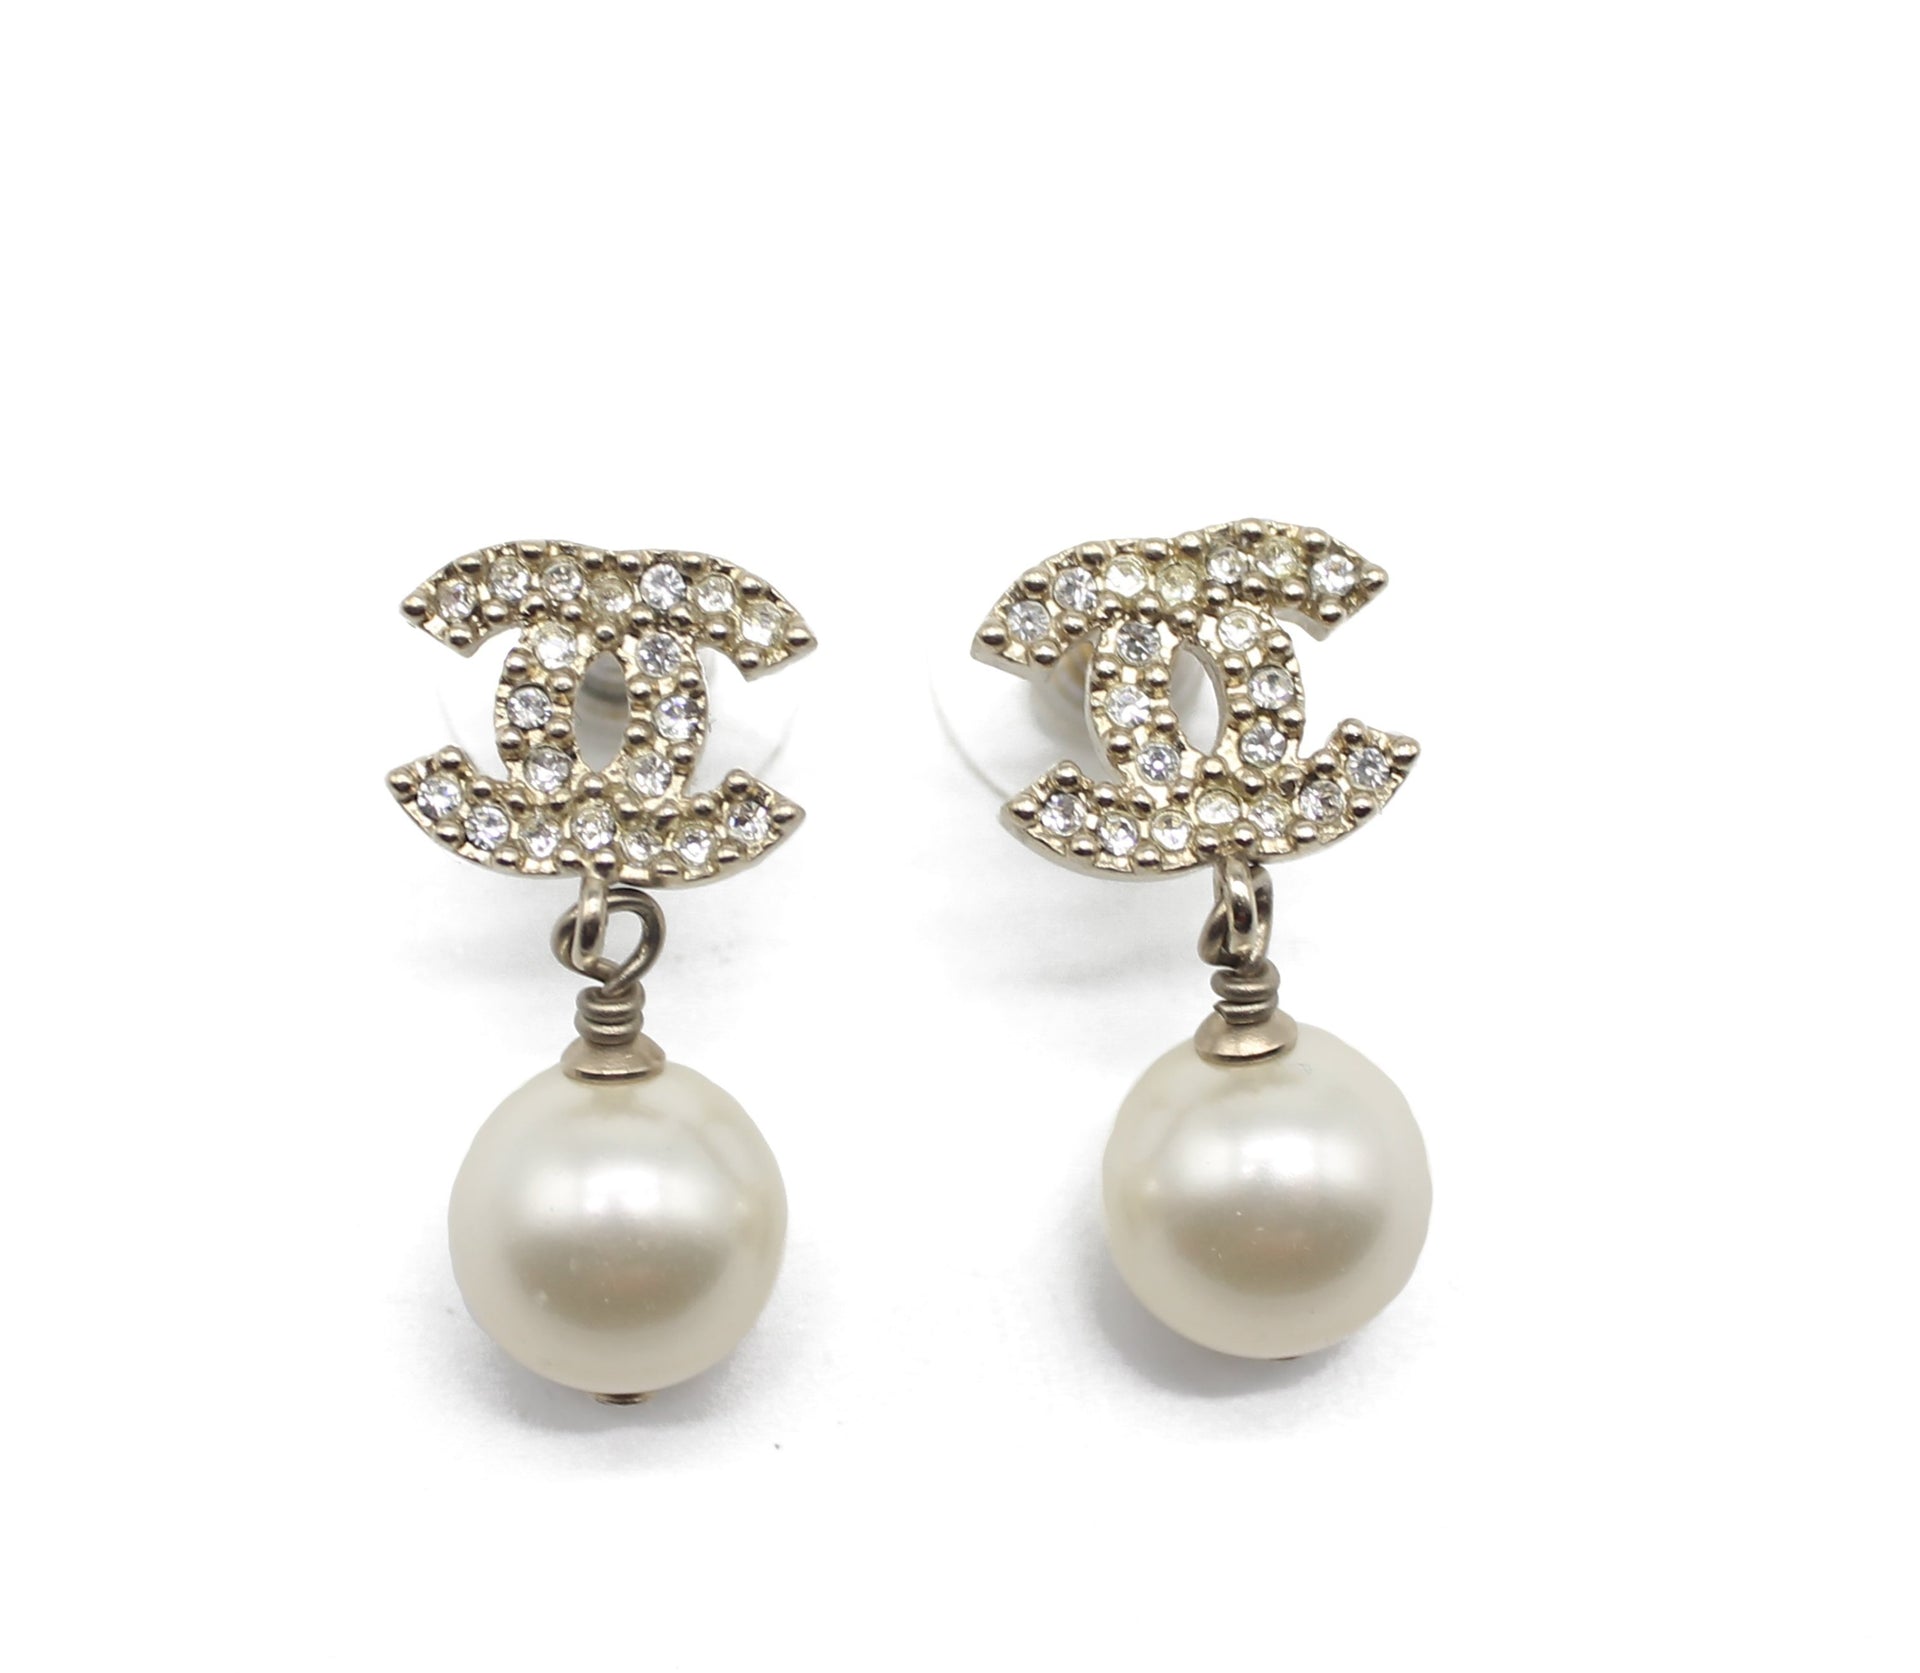 What jewelry should I wear with a burgundy dress: yellow gold, white gold,  or pearls? - Quora